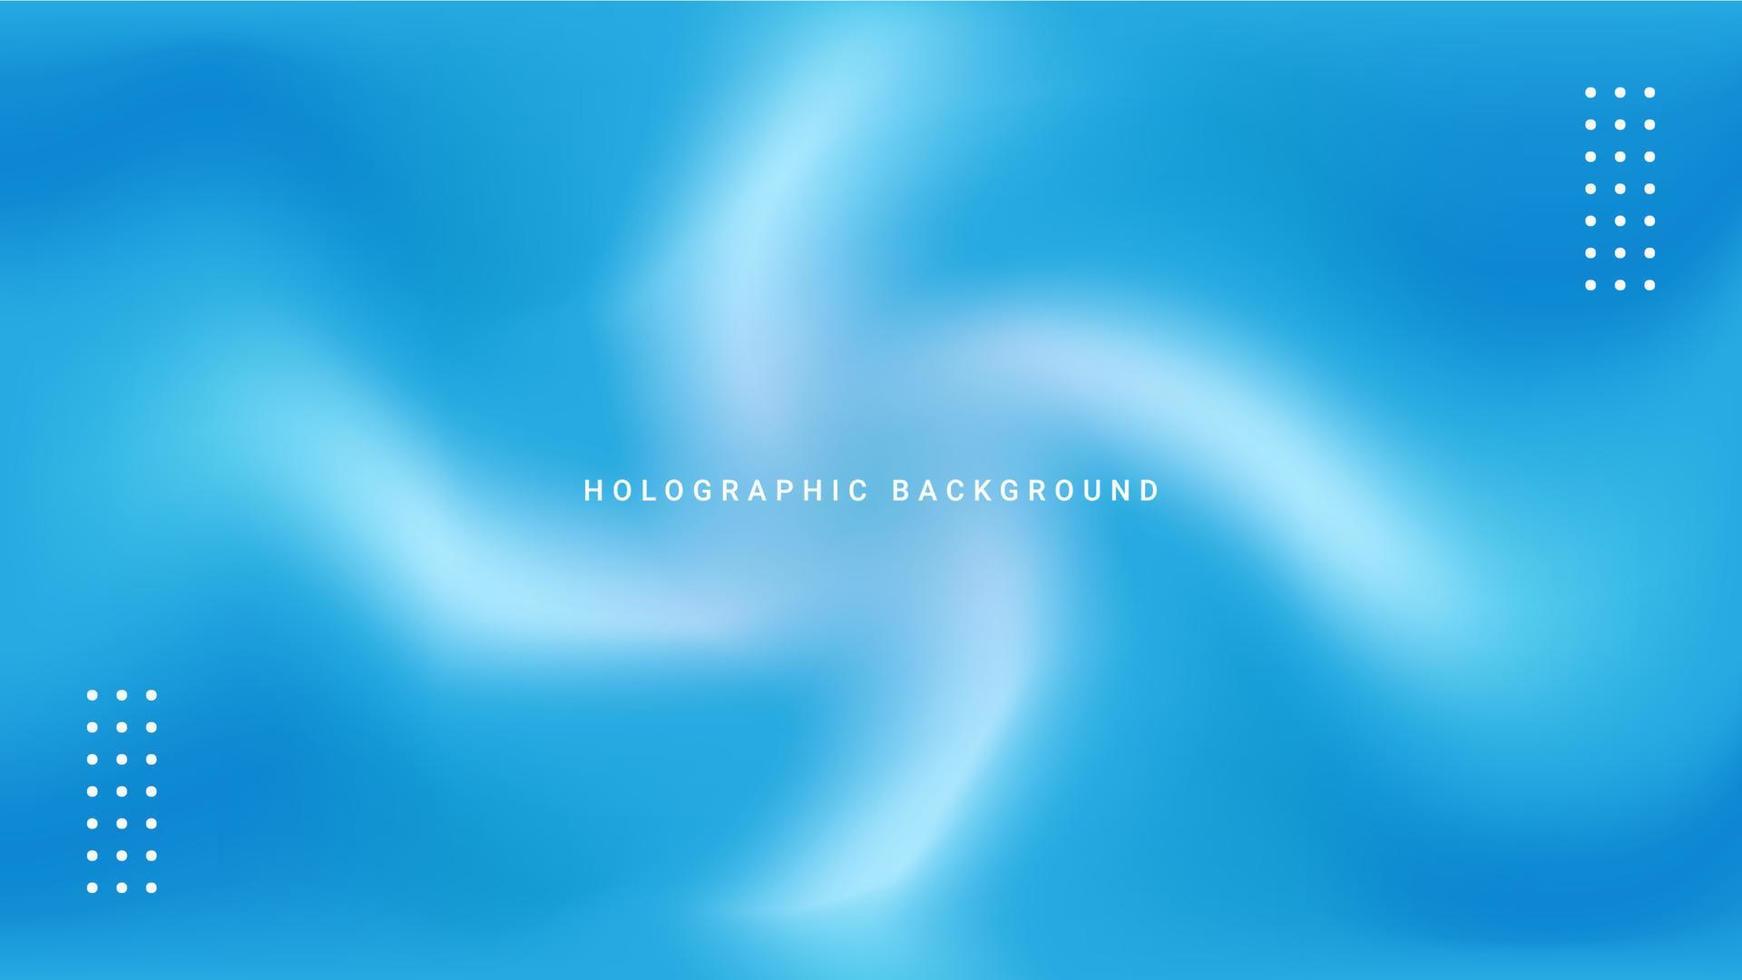 holographic background design in blue and white vector